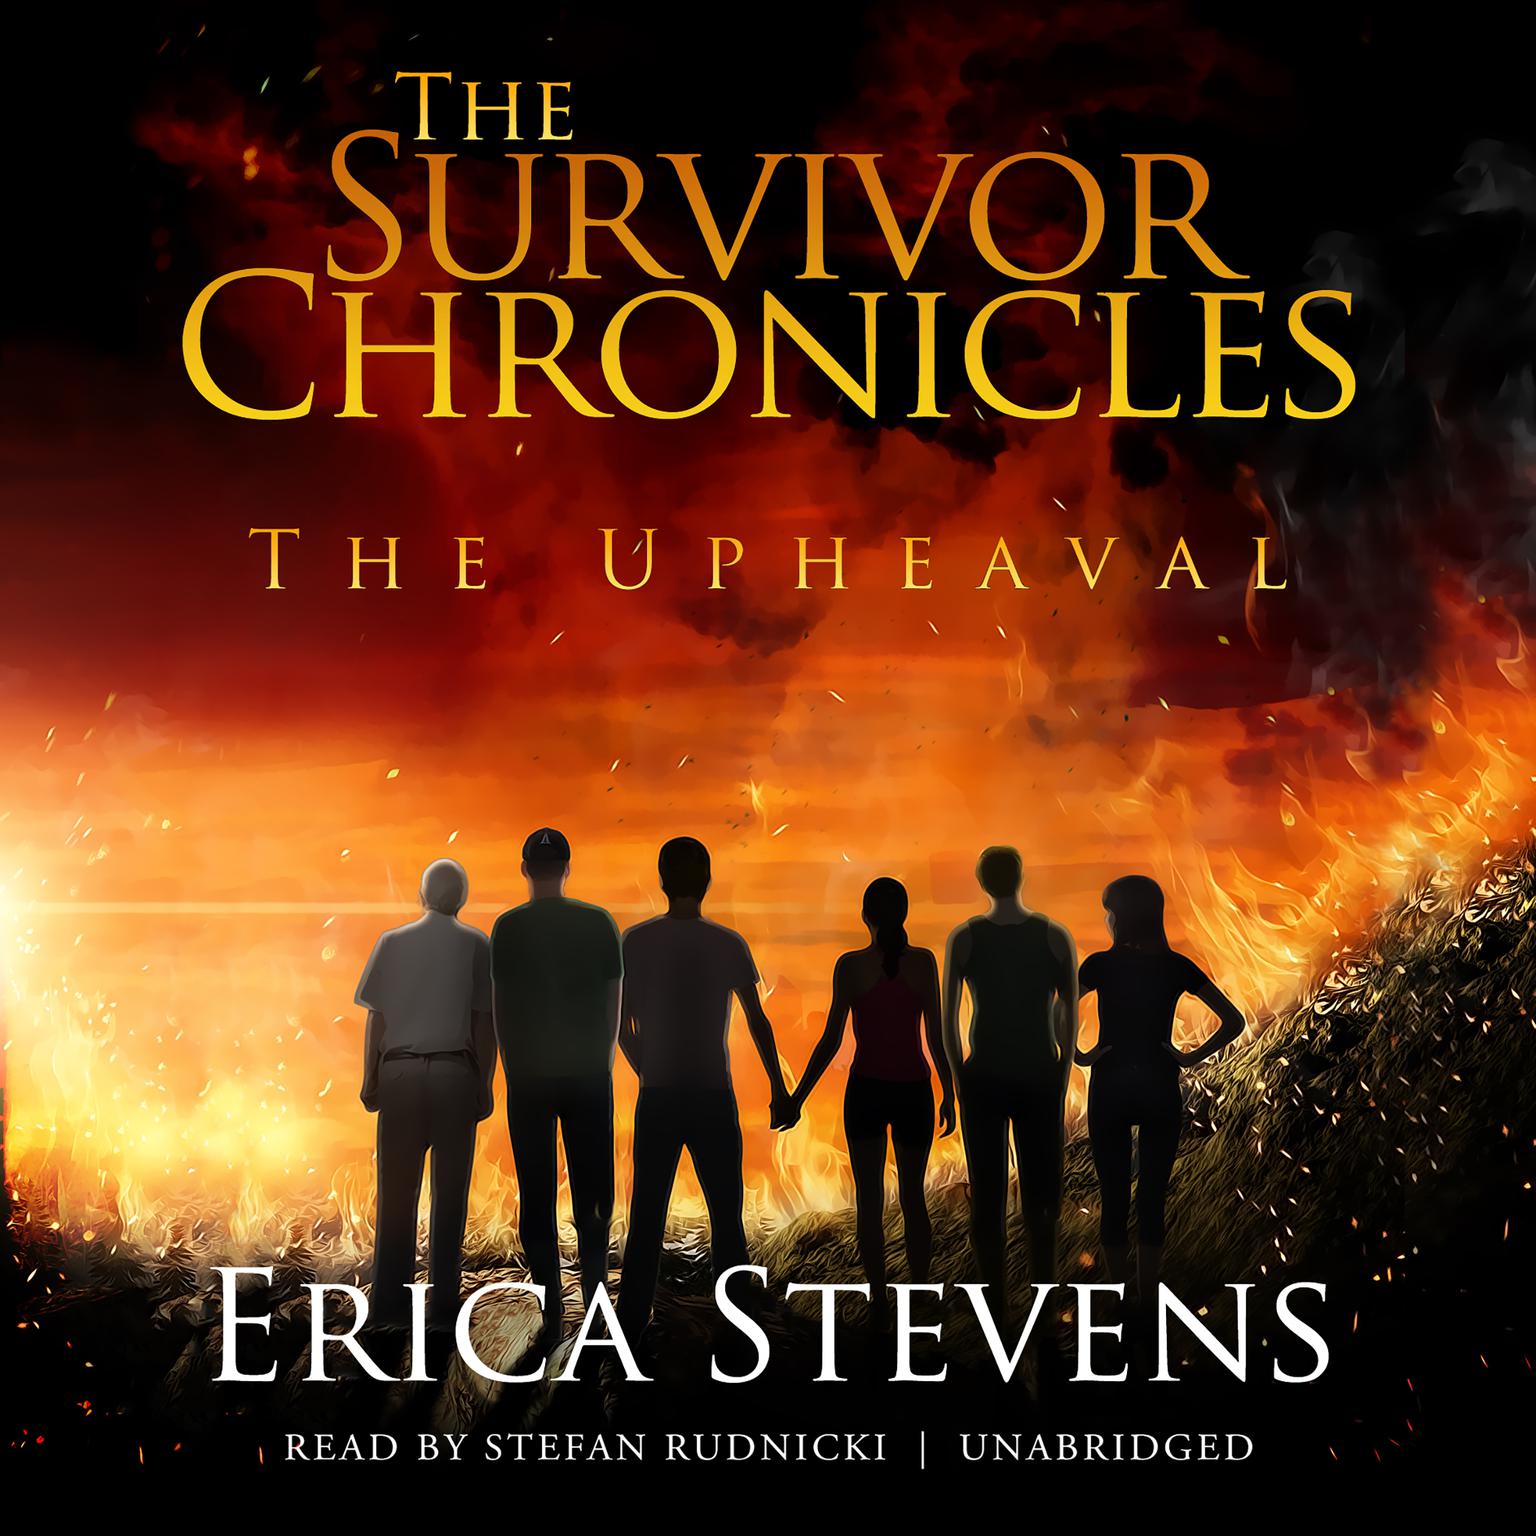 The Upheaval: The Survivor Chronicles, Book 1 Audiobook, by Erica Stevens